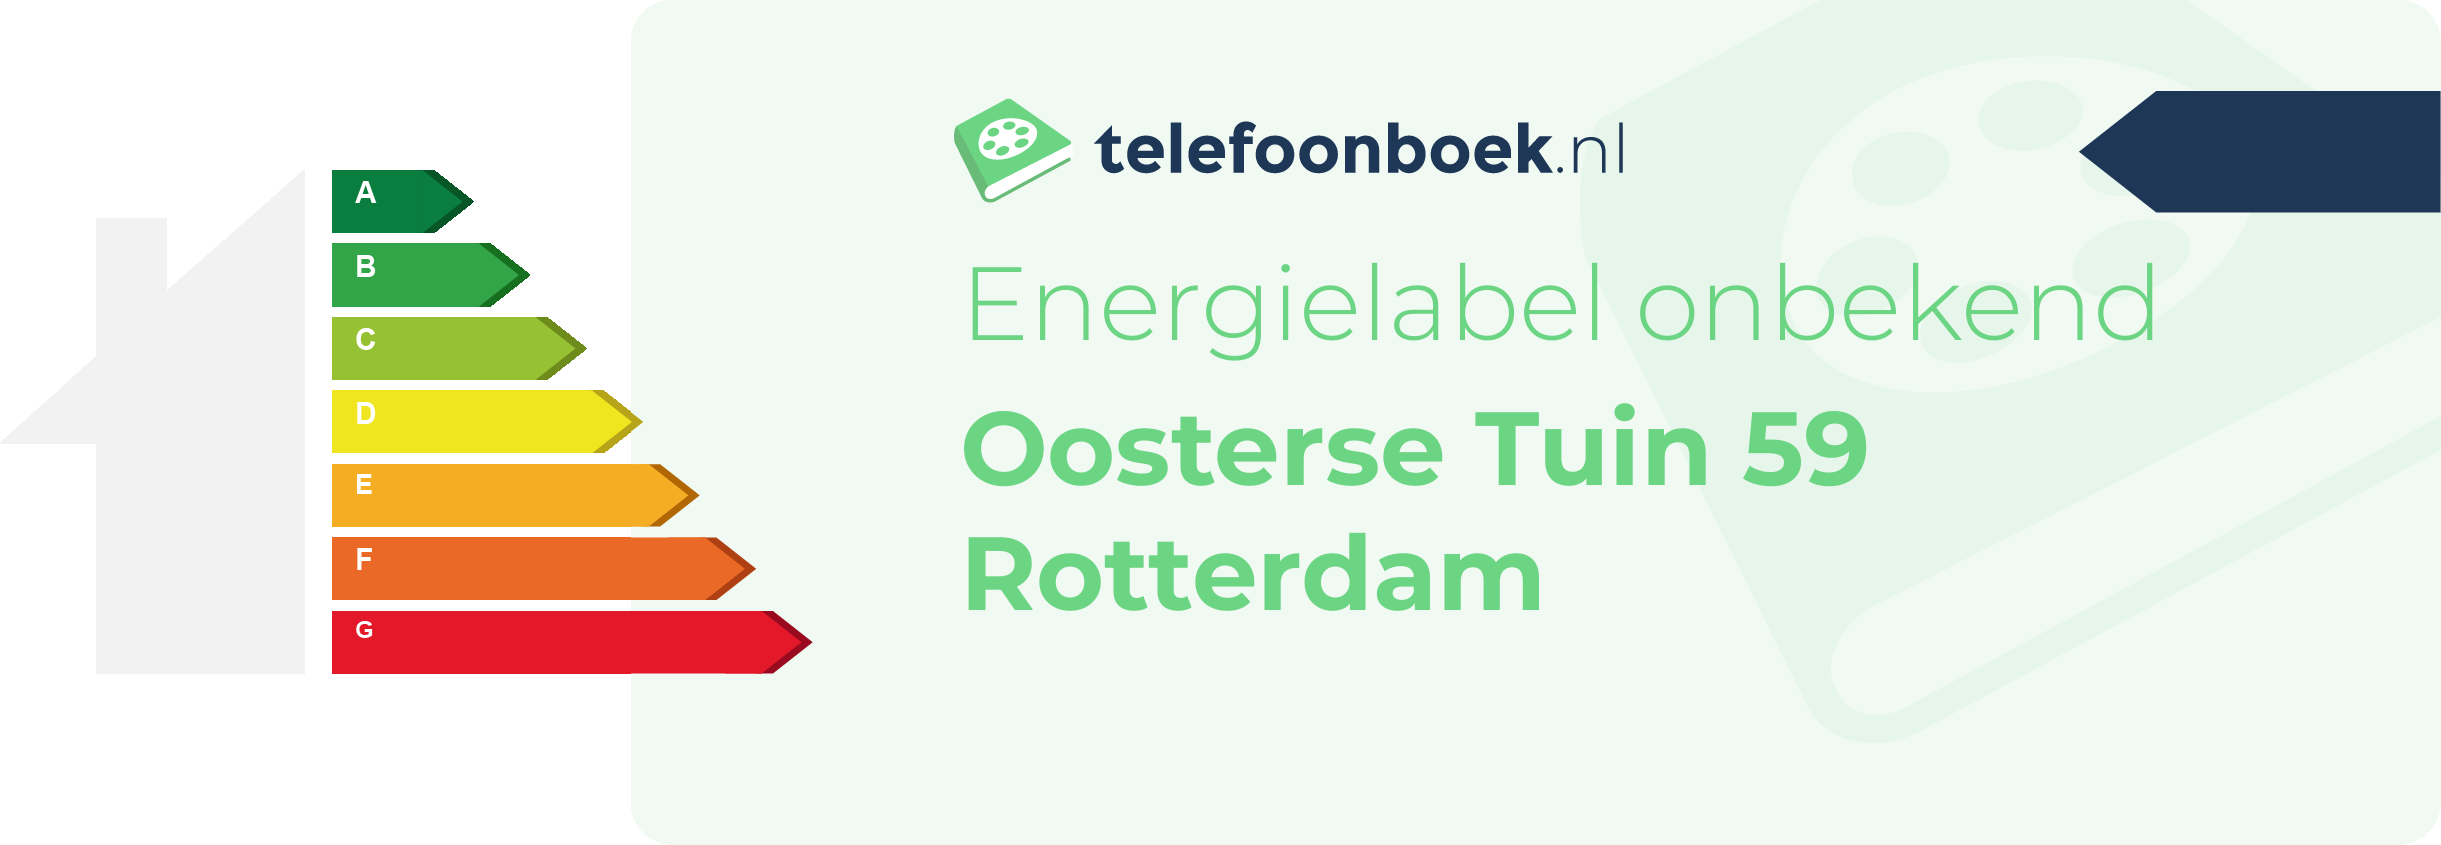 Energielabel Oosterse Tuin 59 Rotterdam